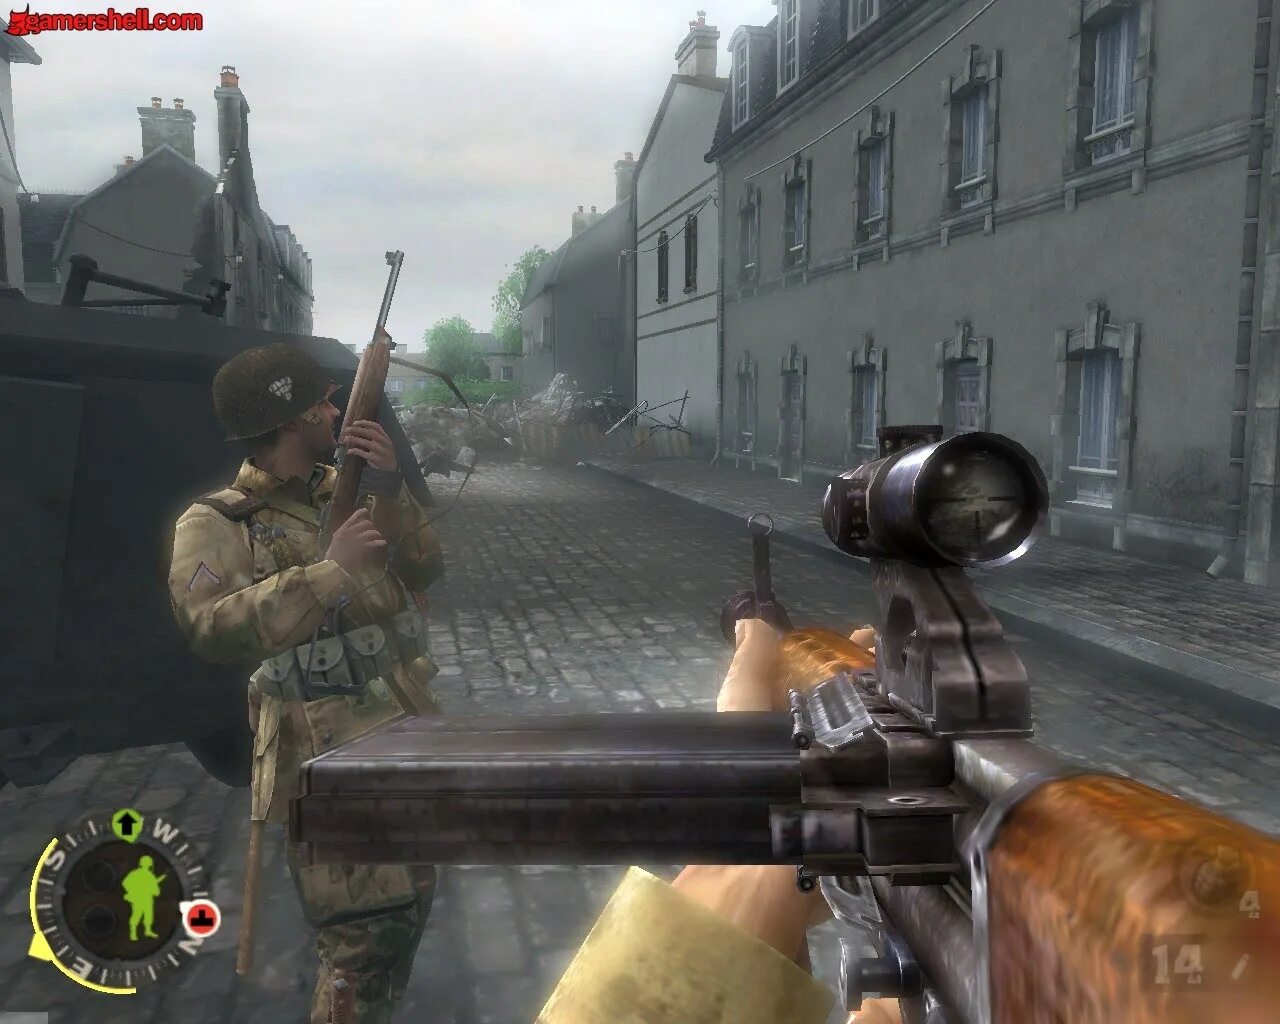 Игра brothers in Arms earned in Blood. Игра brothers in Arms 1. Brothers in Arms: earned in Blood (2005). Brothers in Arms 2005. Игра стрелялки 8